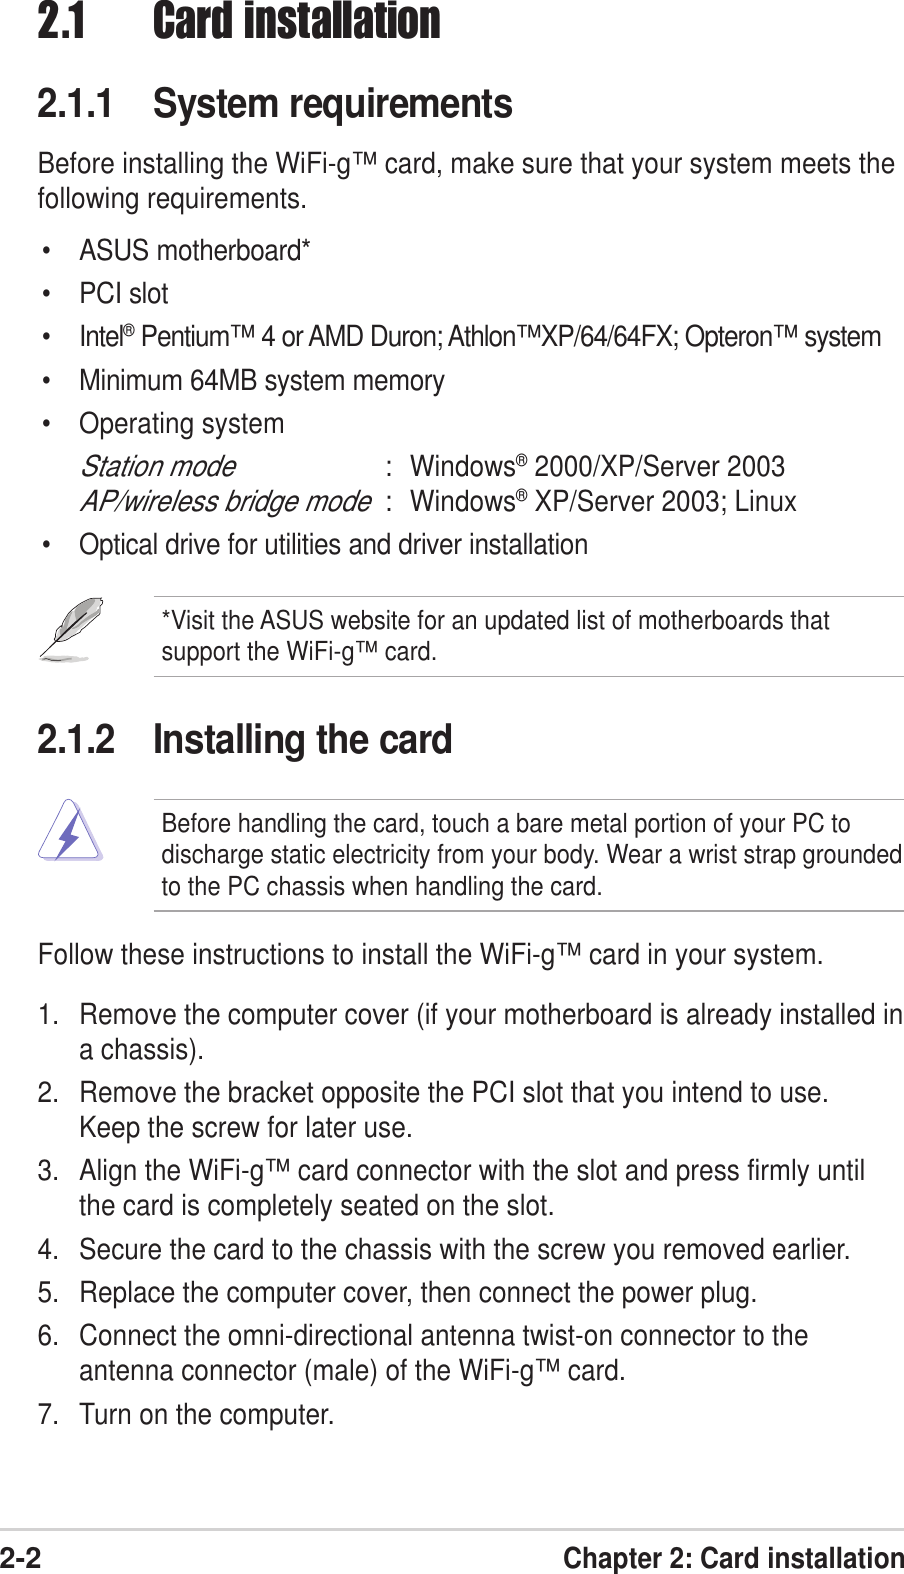 2-2Chapter 2: Card installationFollow these instructions to install the WiFi-g™ card in your system.1. Remove the computer cover (if your motherboard is already installed ina chassis).2. Remove the bracket opposite the PCI slot that you intend to use.Keep the screw for later use.3. Align the WiFi-g™ card connector with the slot and press firmly untilthe card is completely seated on the slot.4. Secure the card to the chassis with the screw you removed earlier.5. Replace the computer cover, then connect the power plug.6. Connect the omni-directional antenna twist-on connector to theantenna connector (male) of the WiFi-g™ card.7. Turn on the computer.2.1.2 Installing the card2.1 Card installation2.1.1 System requirementsBefore installing the WiFi-g™ card, make sure that your system meets thefollowing requirements.• ASUS motherboard*• PCI slot• Intel® Pentium™ 4 or AMD Duron; Athlon™XP/64/64FX; Opteron™ system• Minimum 64MB system memory• Operating systemStation mode: Windows® 2000/XP/Server 2003AP/wireless bridge mode: Windows® XP/Server 2003; Linux• Optical drive for utilities and driver installation*Visit the ASUS website for an updated list of motherboards thatsupport the WiFi-g™ card.Before handling the card, touch a bare metal portion of your PC todischarge static electricity from your body. Wear a wrist strap groundedto the PC chassis when handling the card.